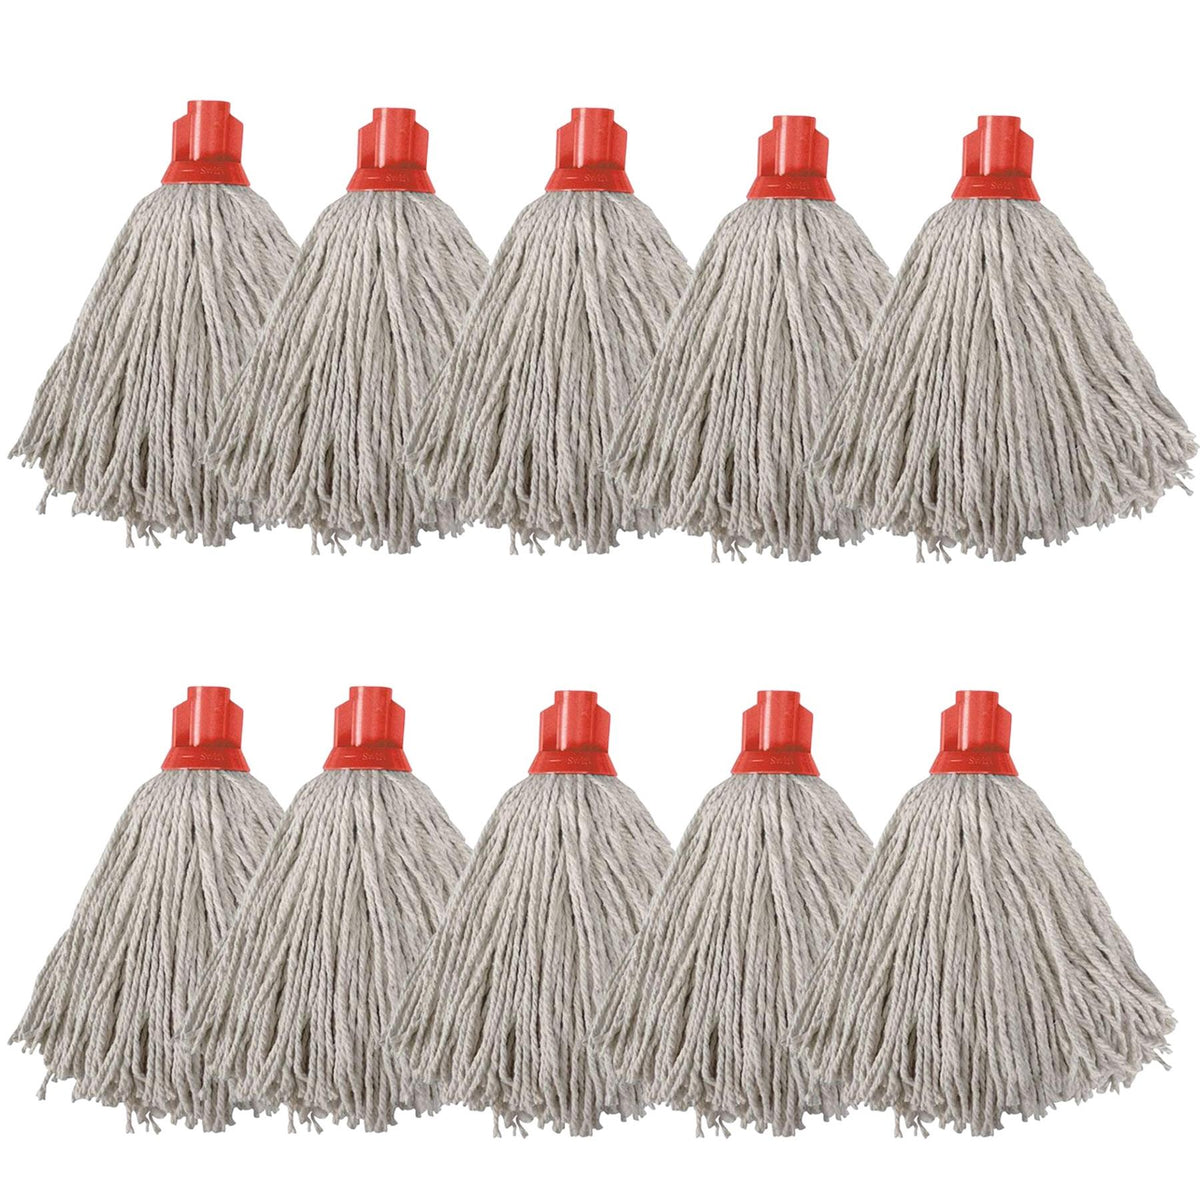 Swift PY Cotton Socket Mop, Pack of 10 Red